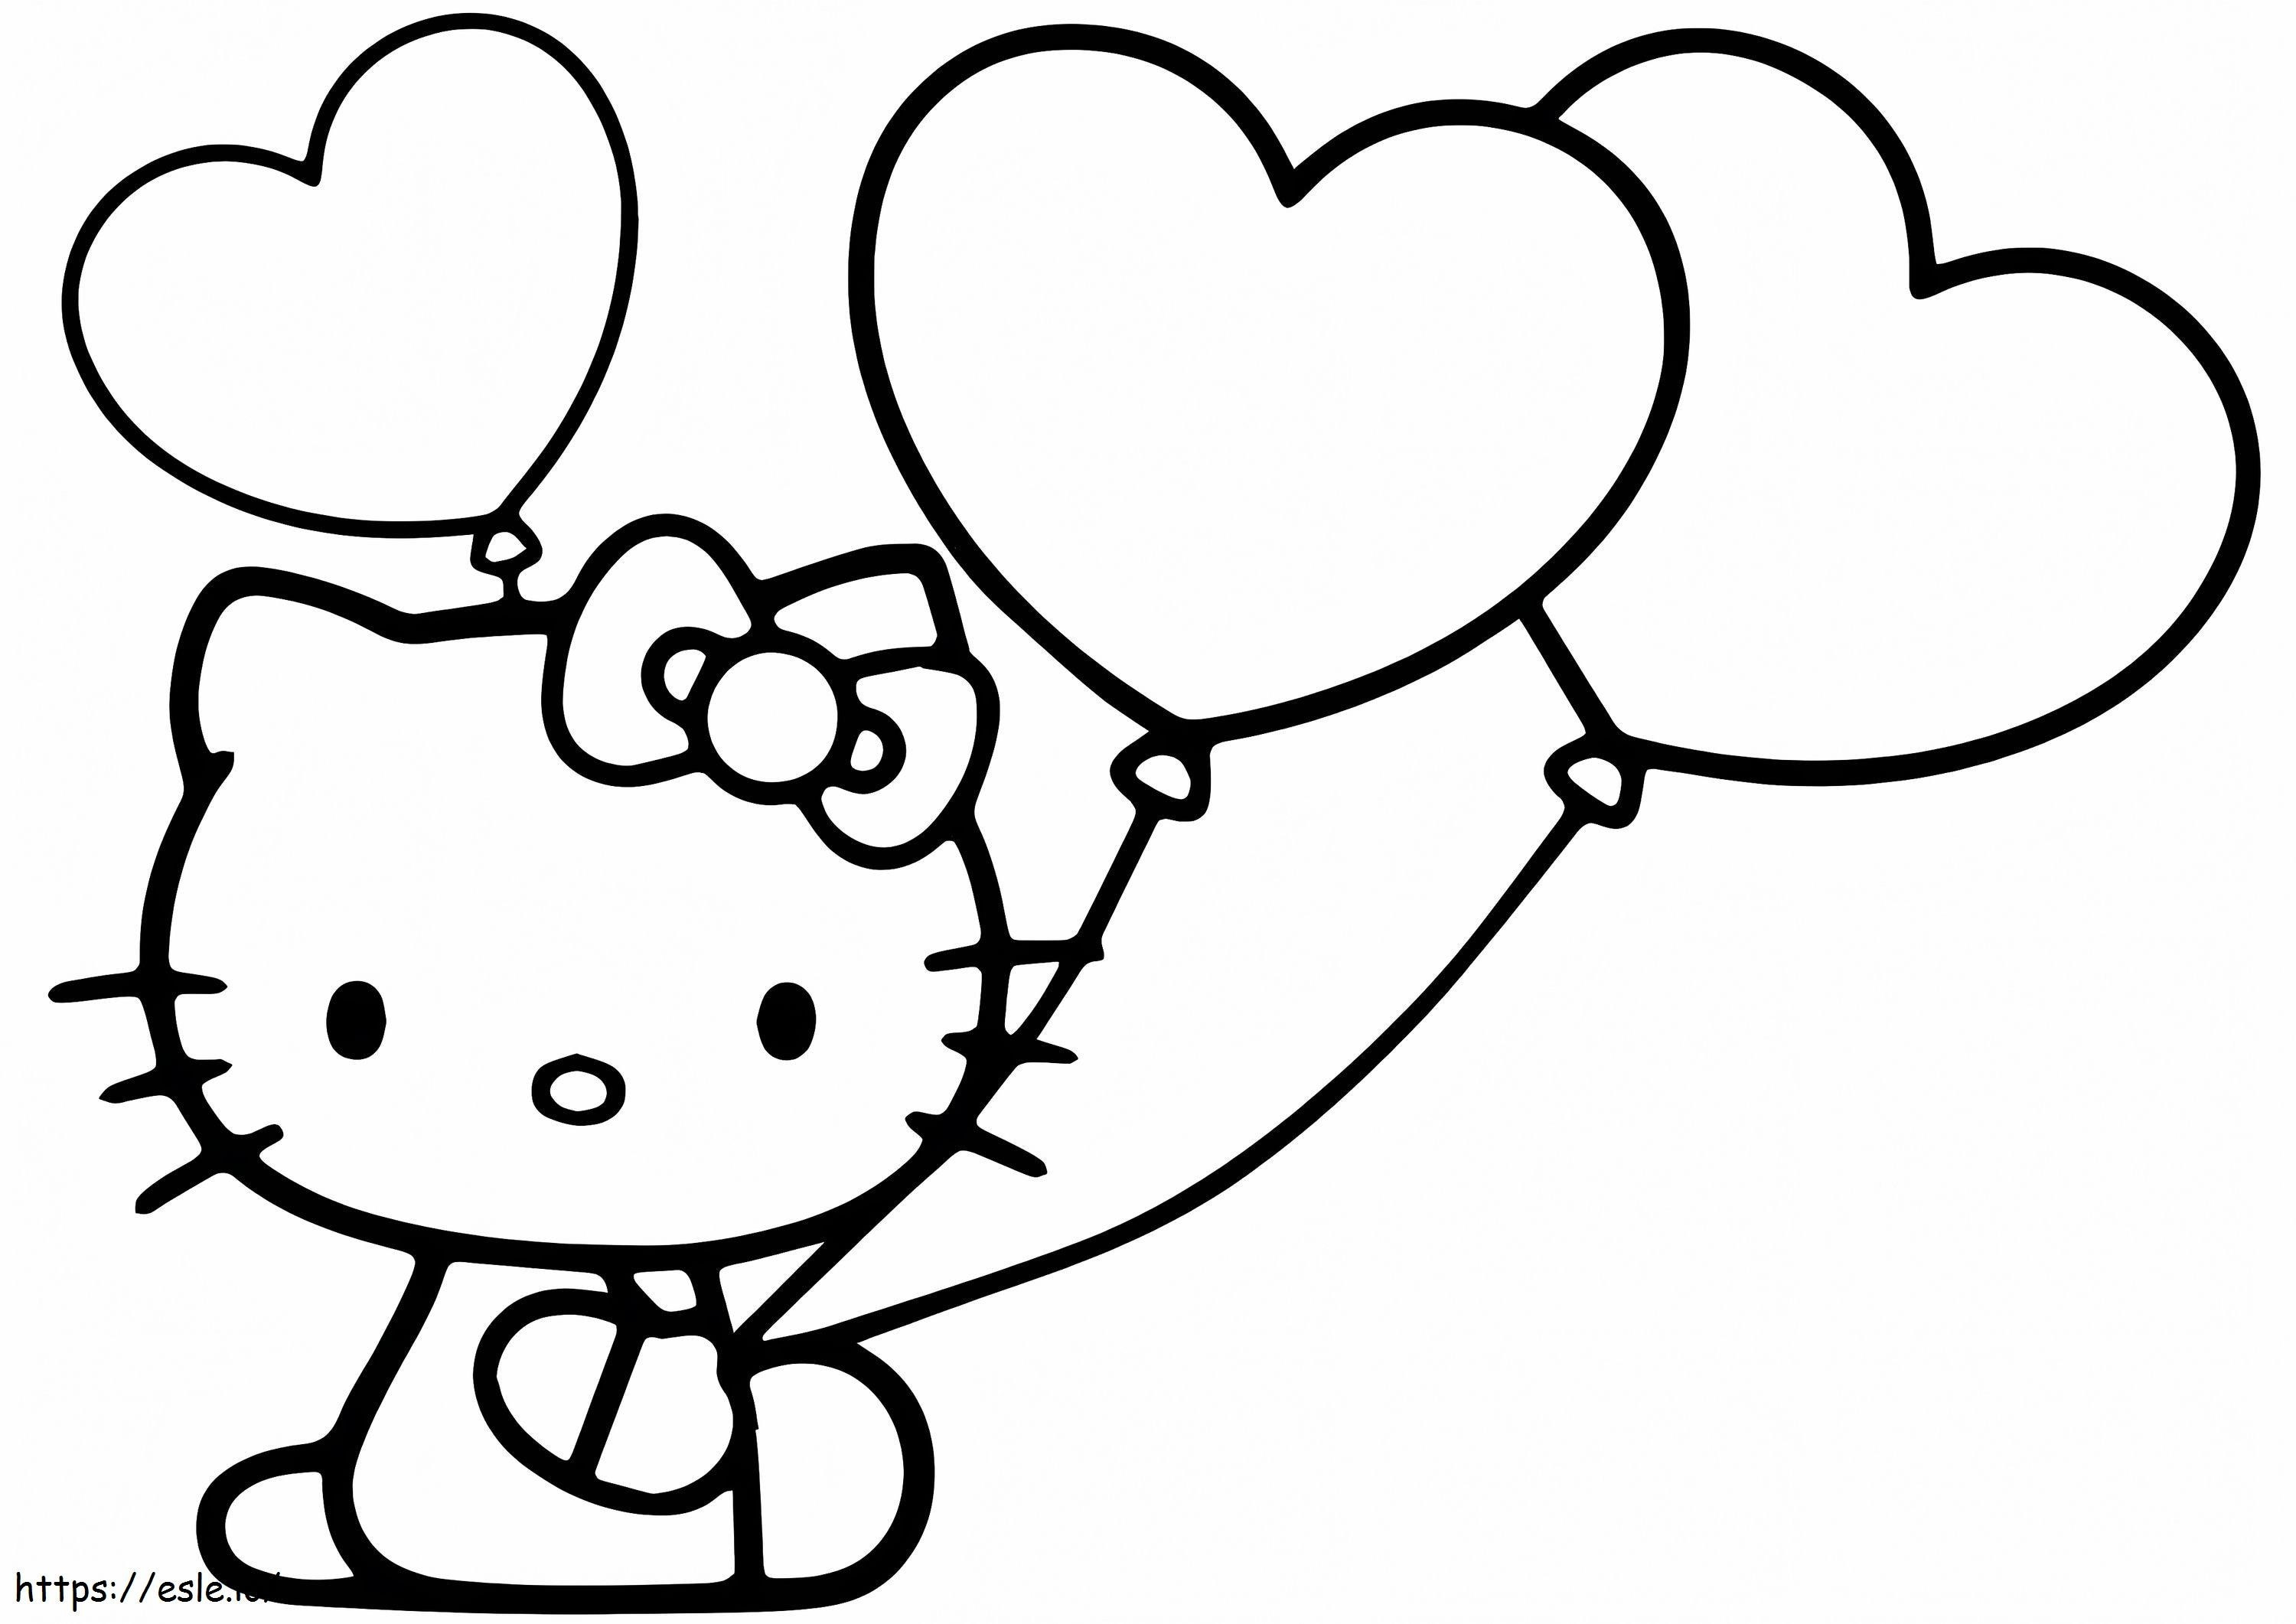 Hello Kitty With Heart Balloons coloring page